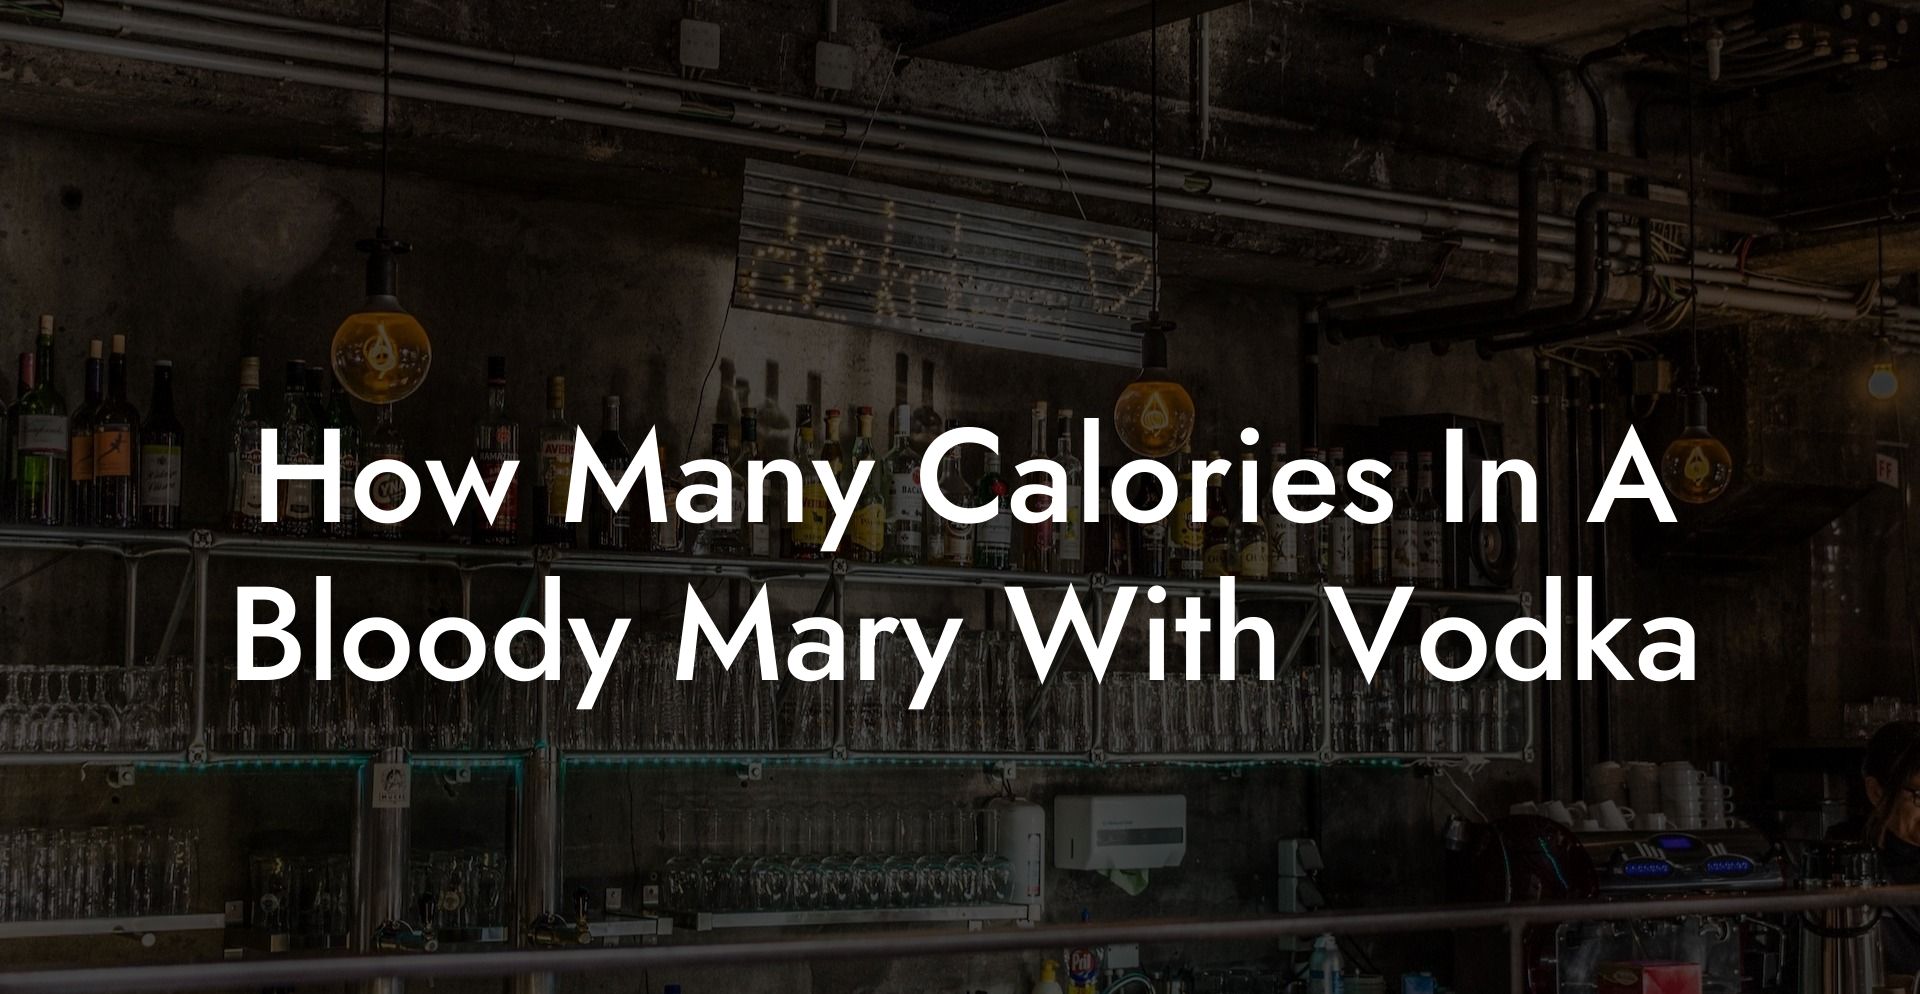 How Many Calories In A Bloody Mary With Vodka